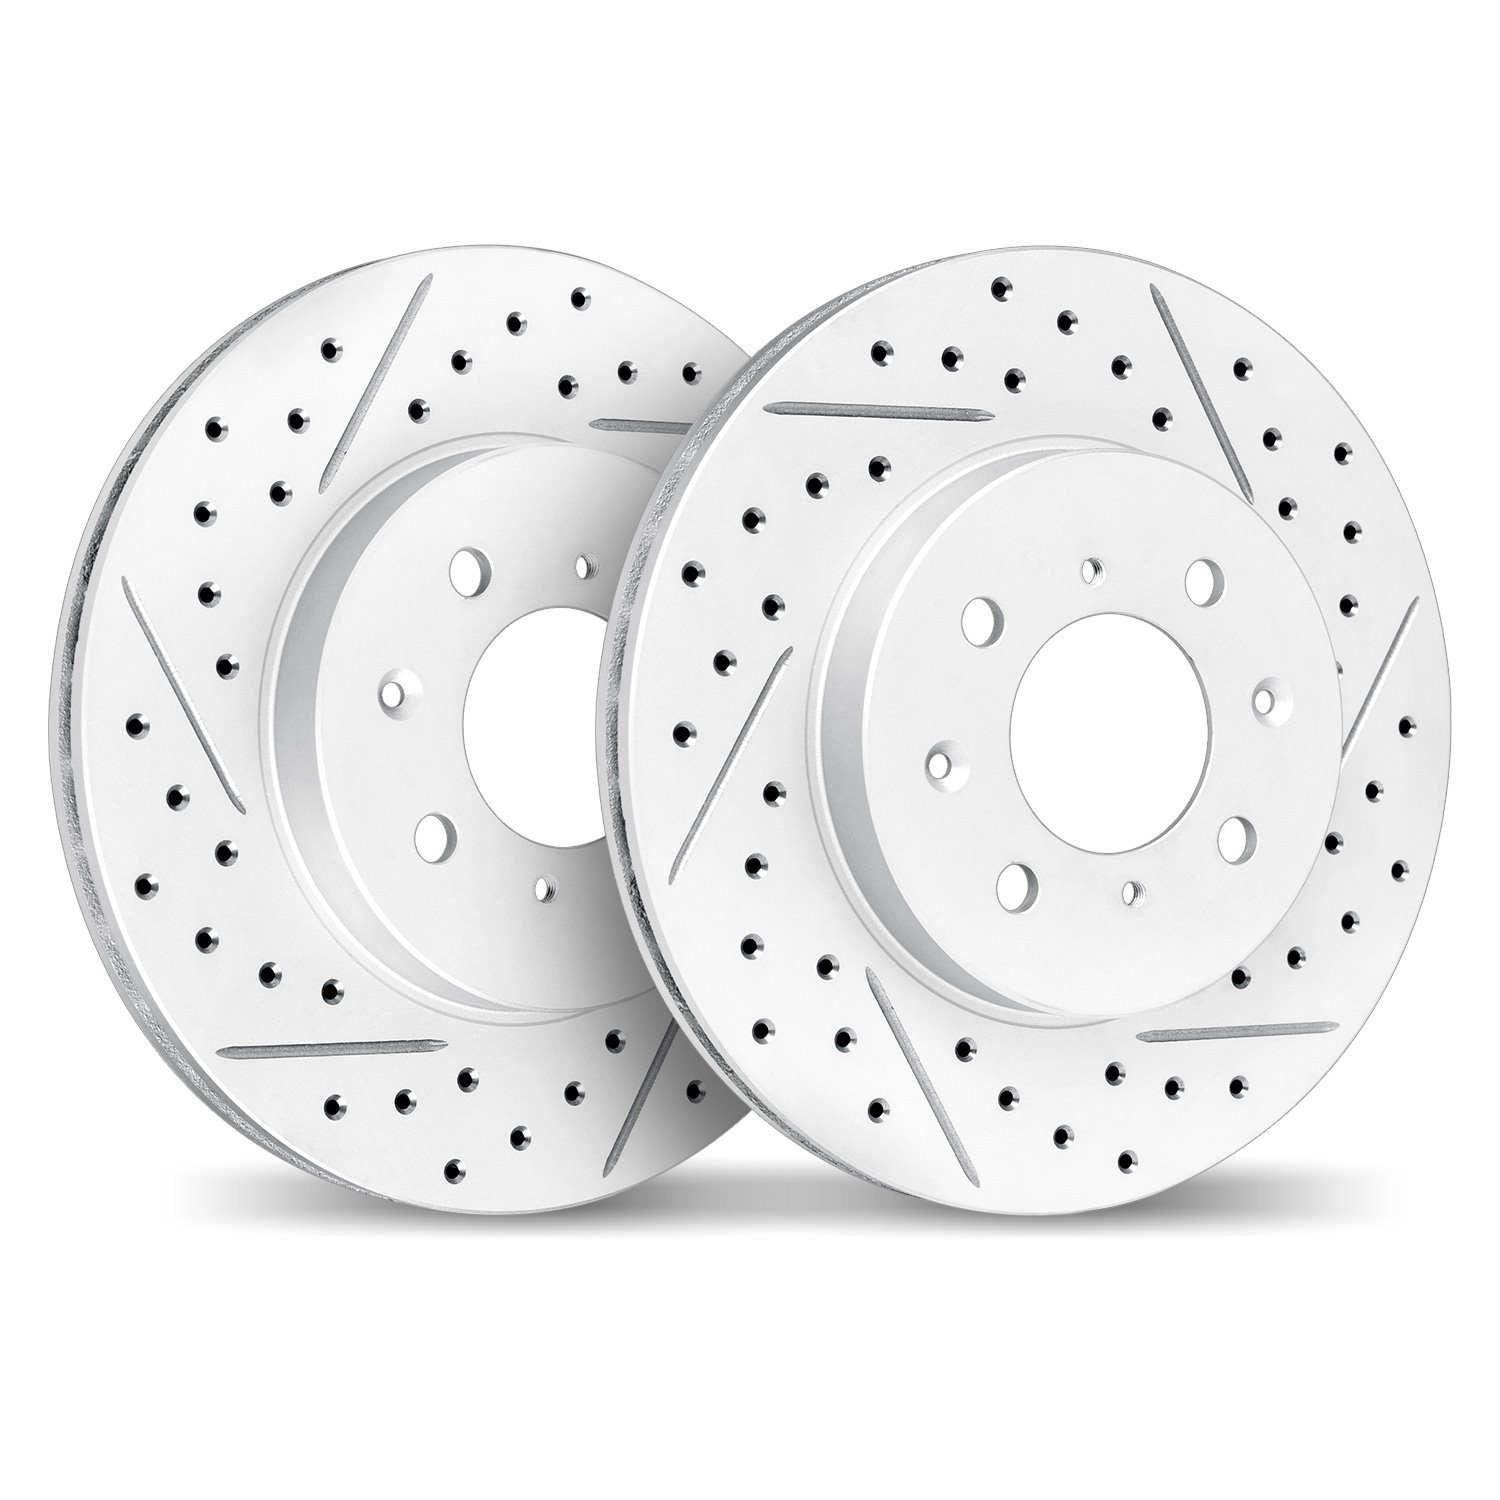 2002-54031 Geoperformance Drilled/Slotted Brake Rotors, 1990-2003 Ford/Lincoln/Mercury/Mazda, Position: Front